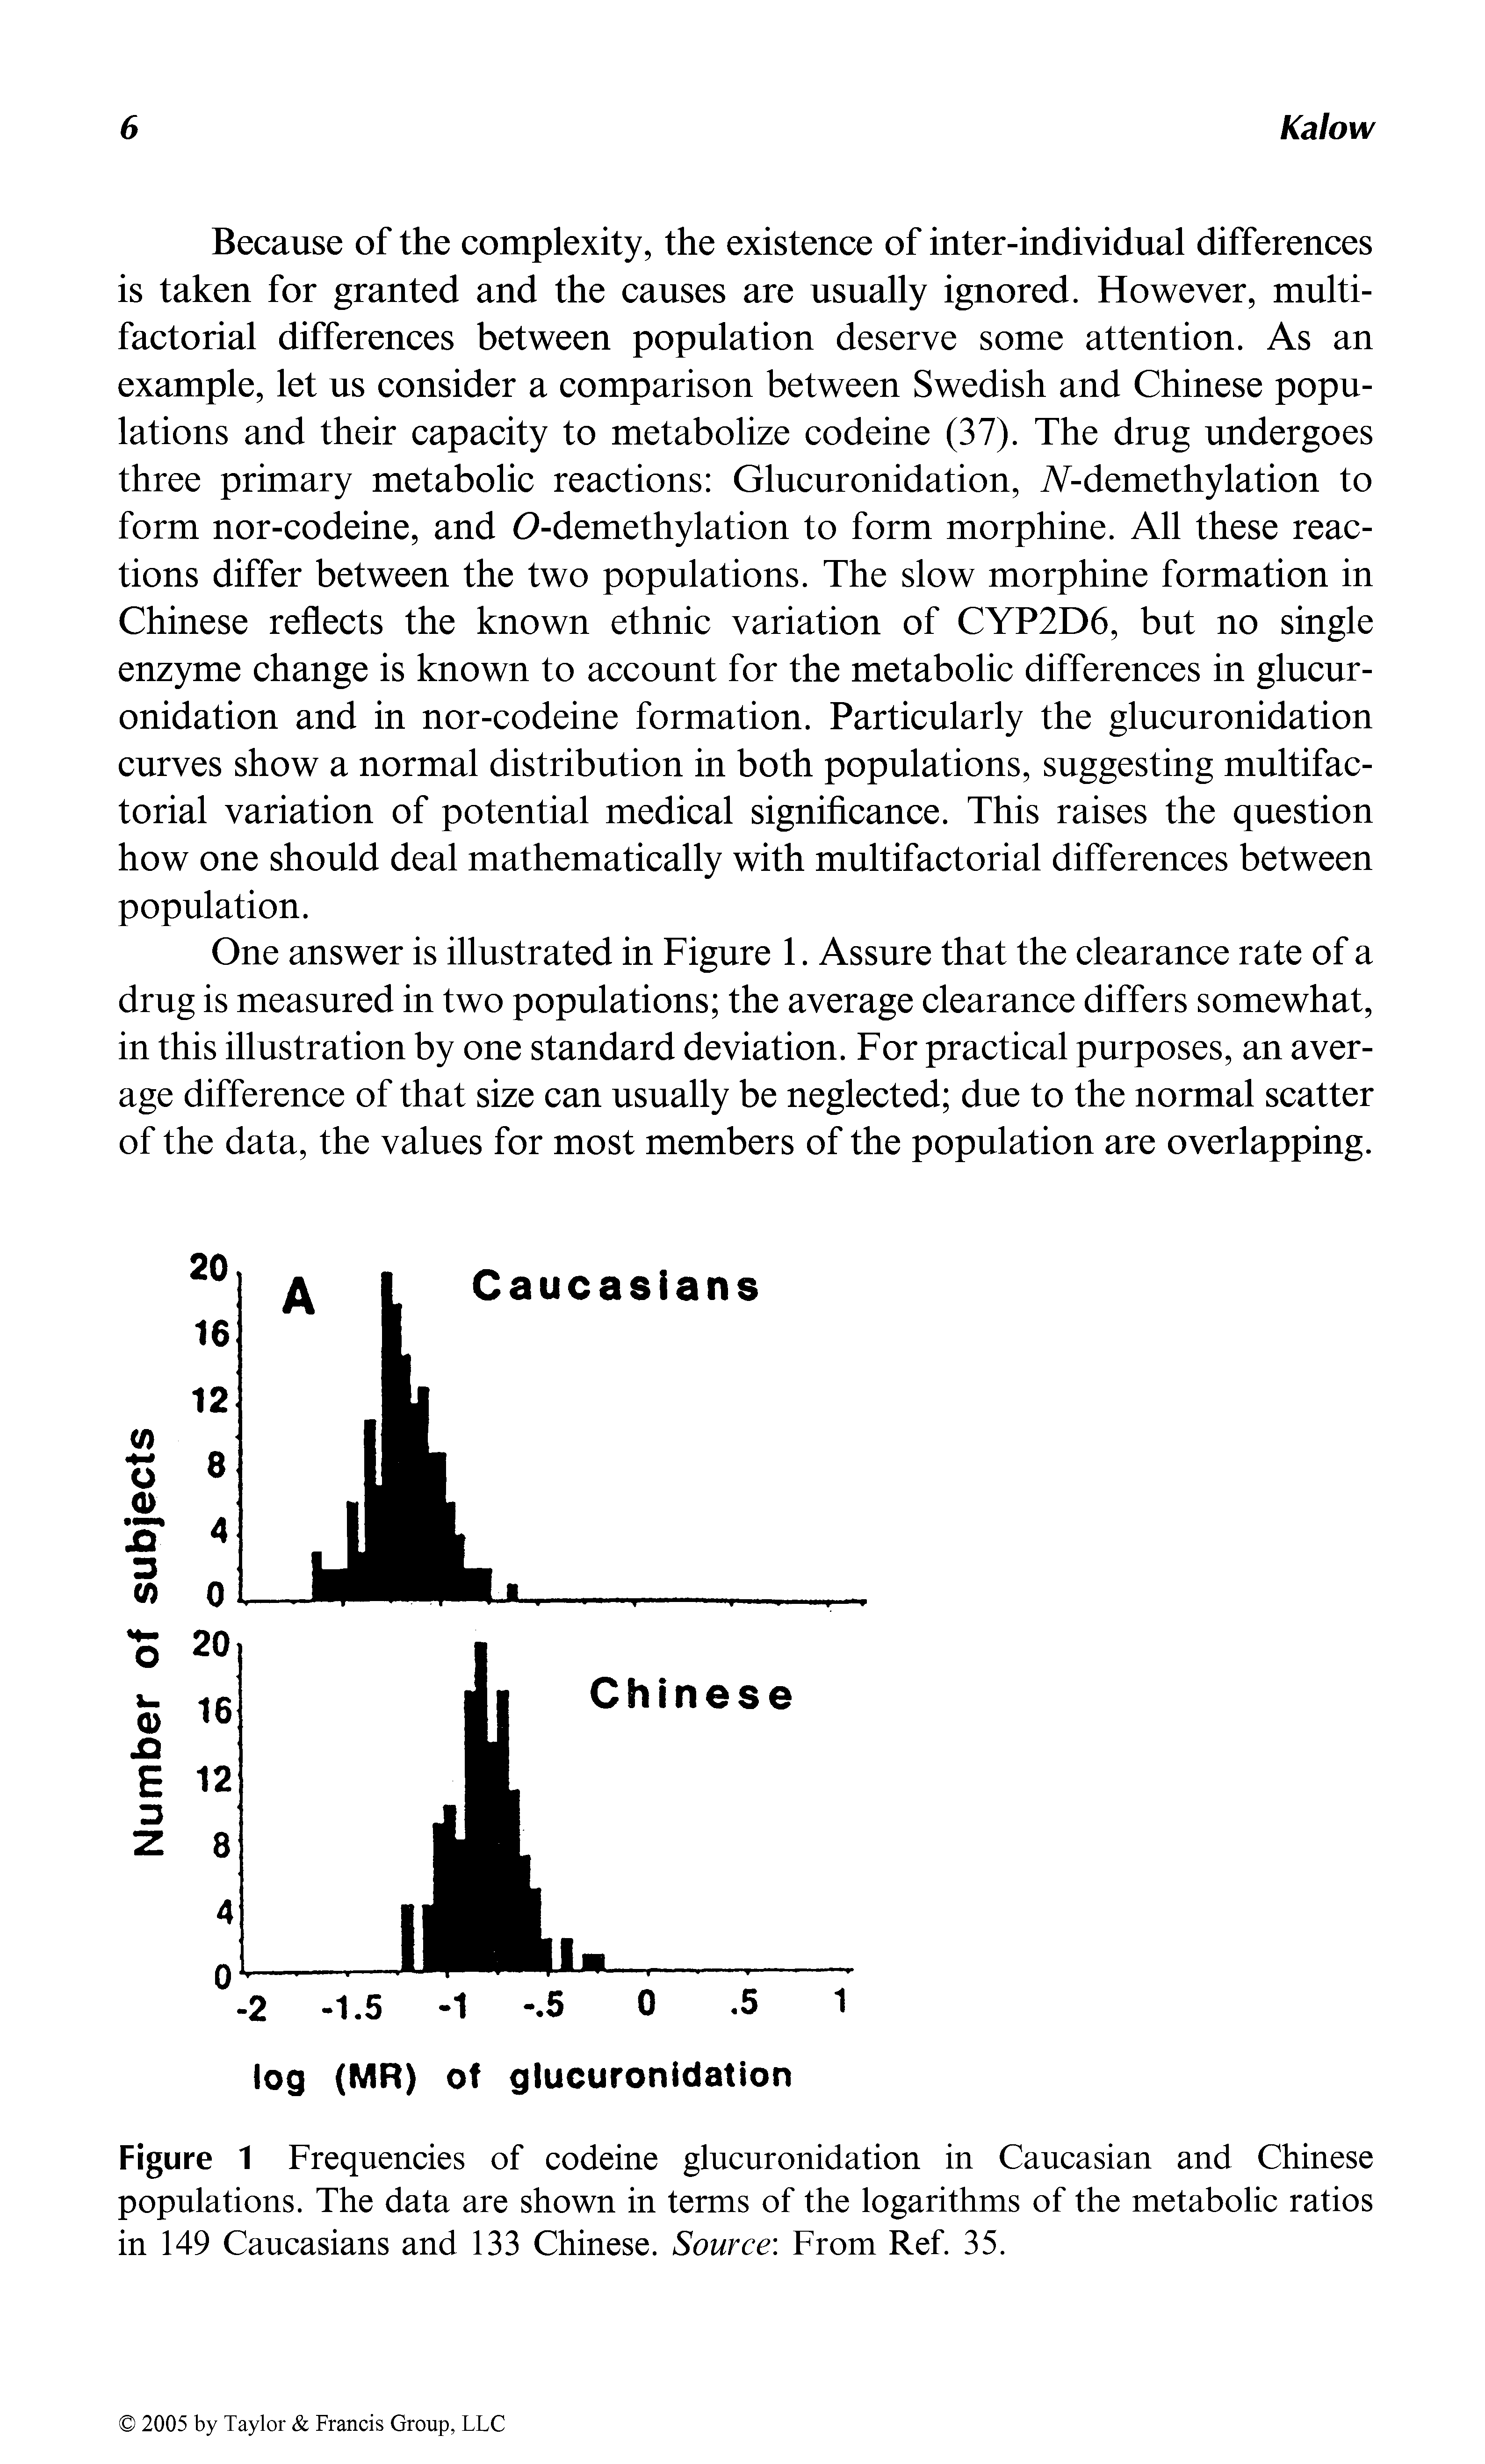 Figure 1 Frequencies of codeine glucuronidation in Caucasian and Chinese populations. The data are shown in terms of the logarithms of the metabolic ratios in 149 Caucasians and 133 Chinese. Source From Ref. 35.